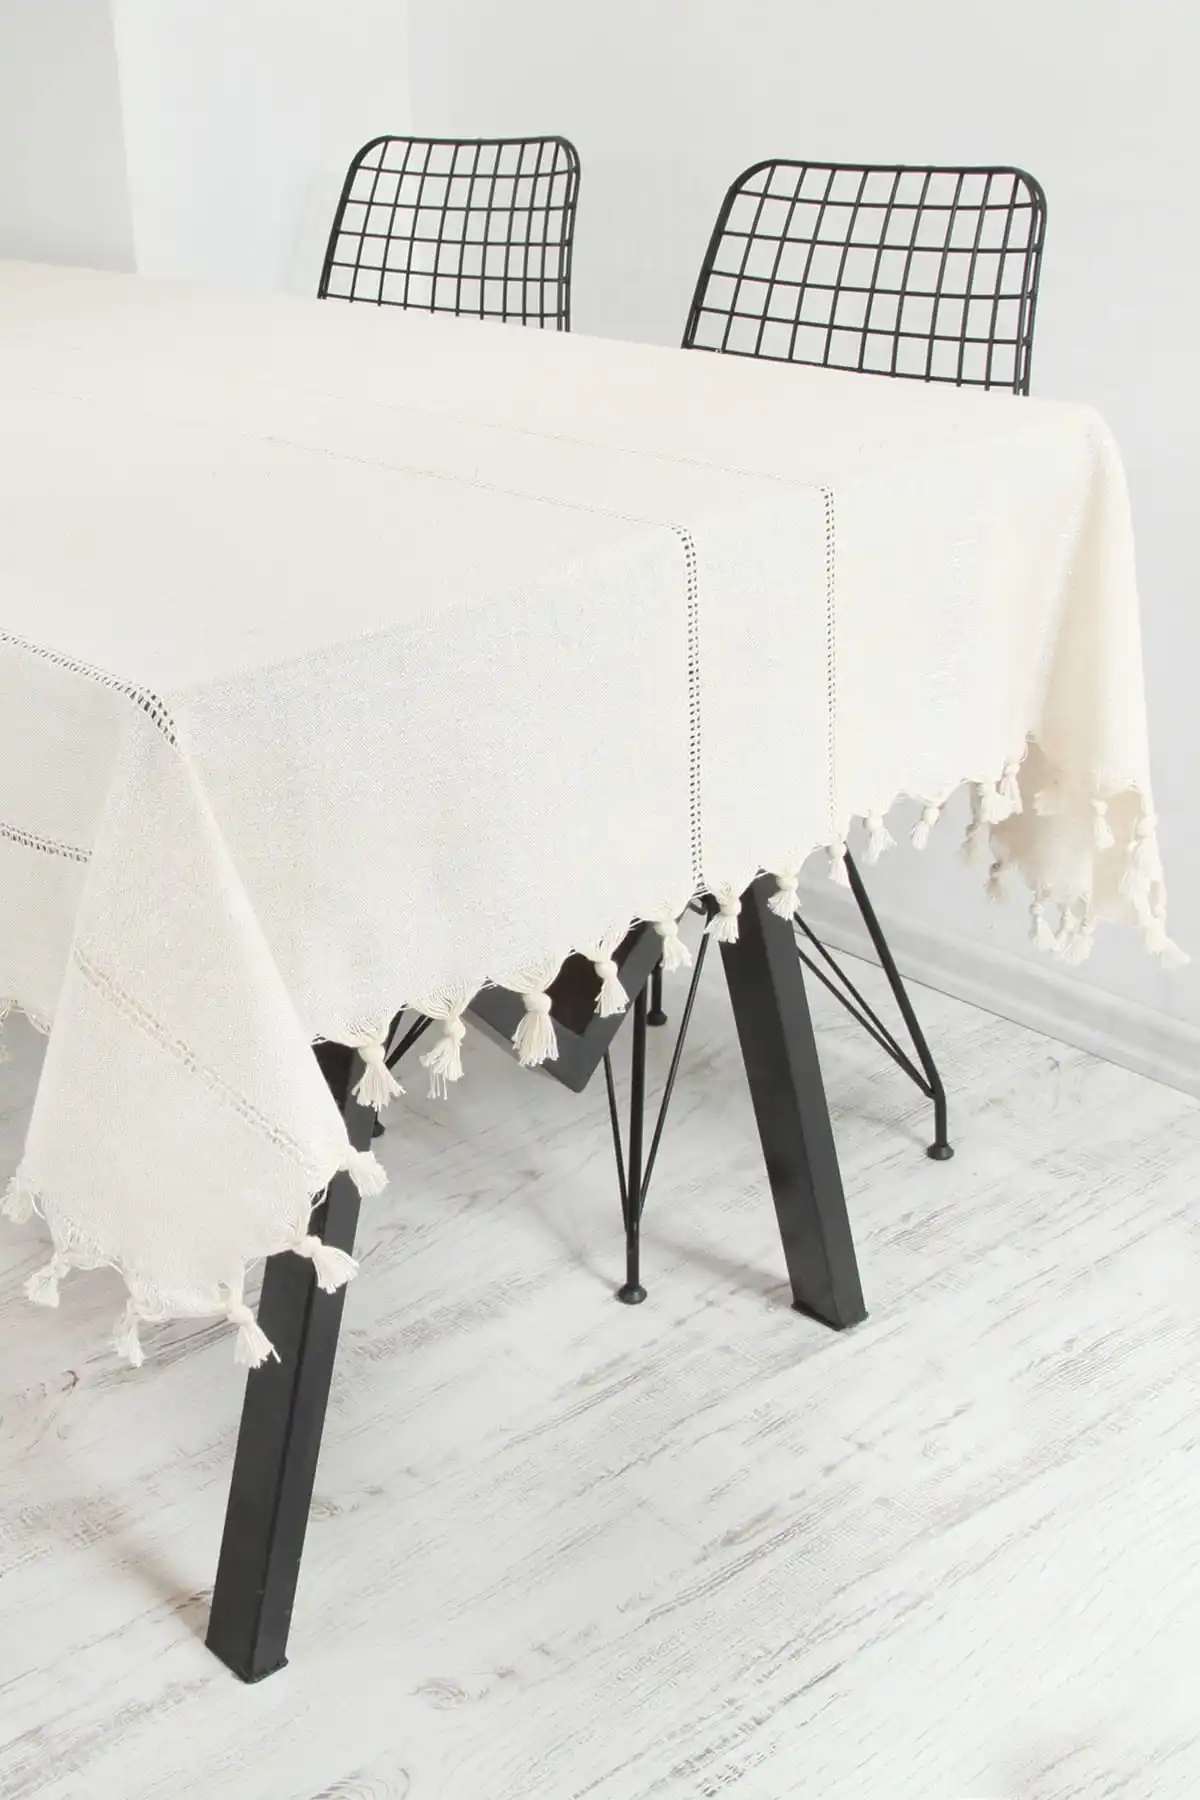 %100 Cotton Tablecloth Cotton Solid Color Hotel Picnic Table Rectangular Table Covers Home Dining Tea Table Decoration Lace